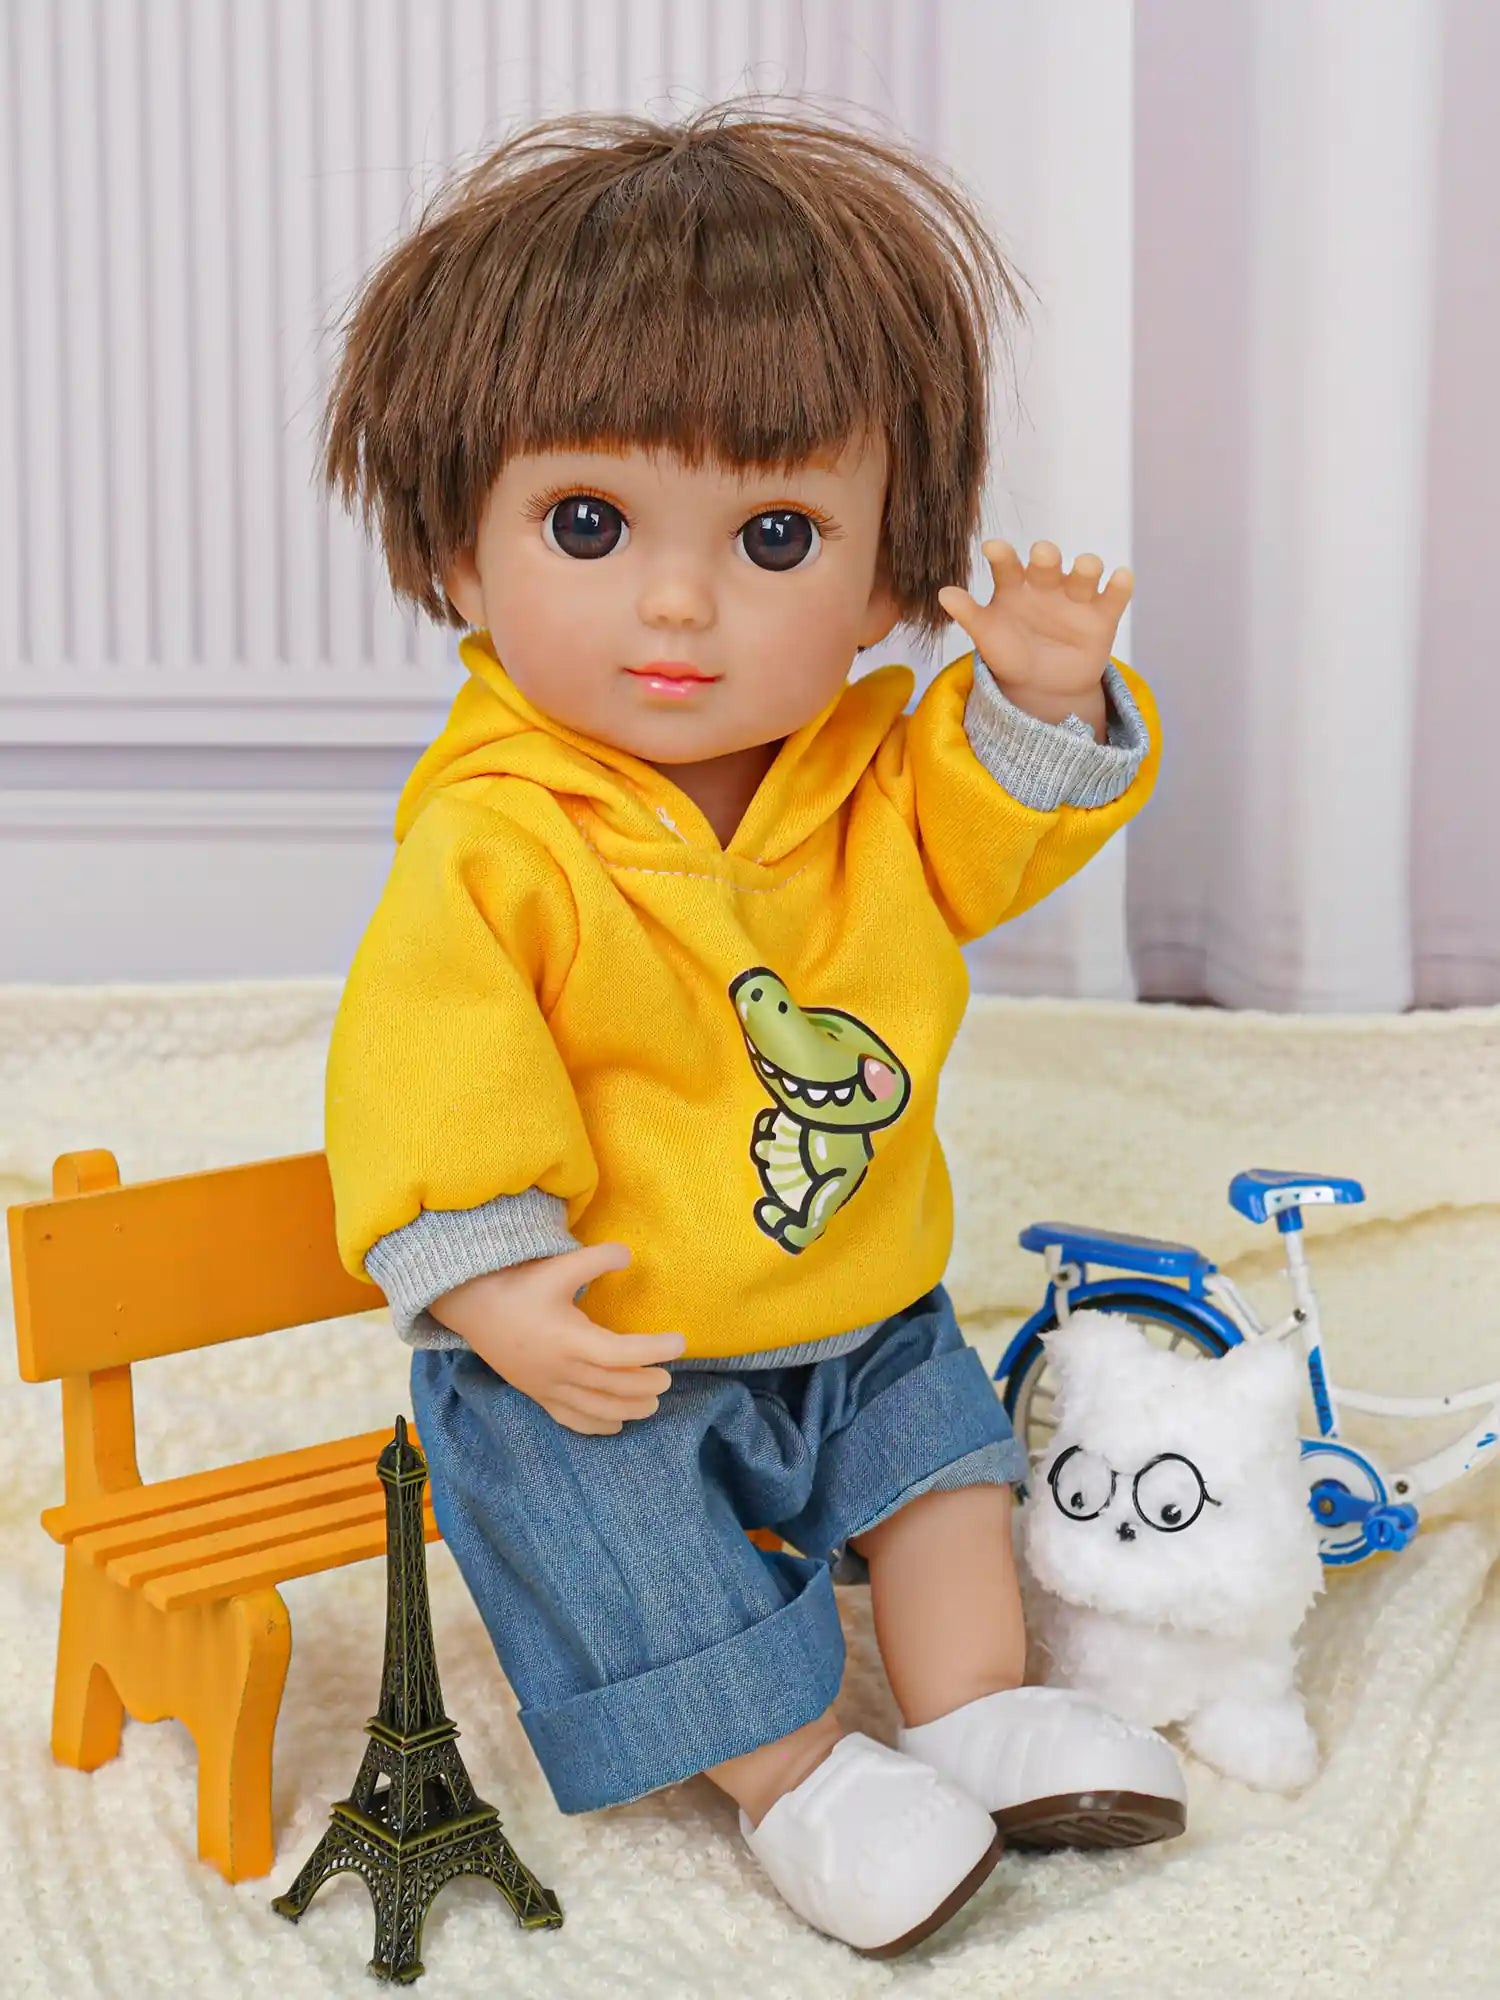 Doll with a short haircut, dressed in a sunny yellow sweatshirt, beside a white toy dog and bike.